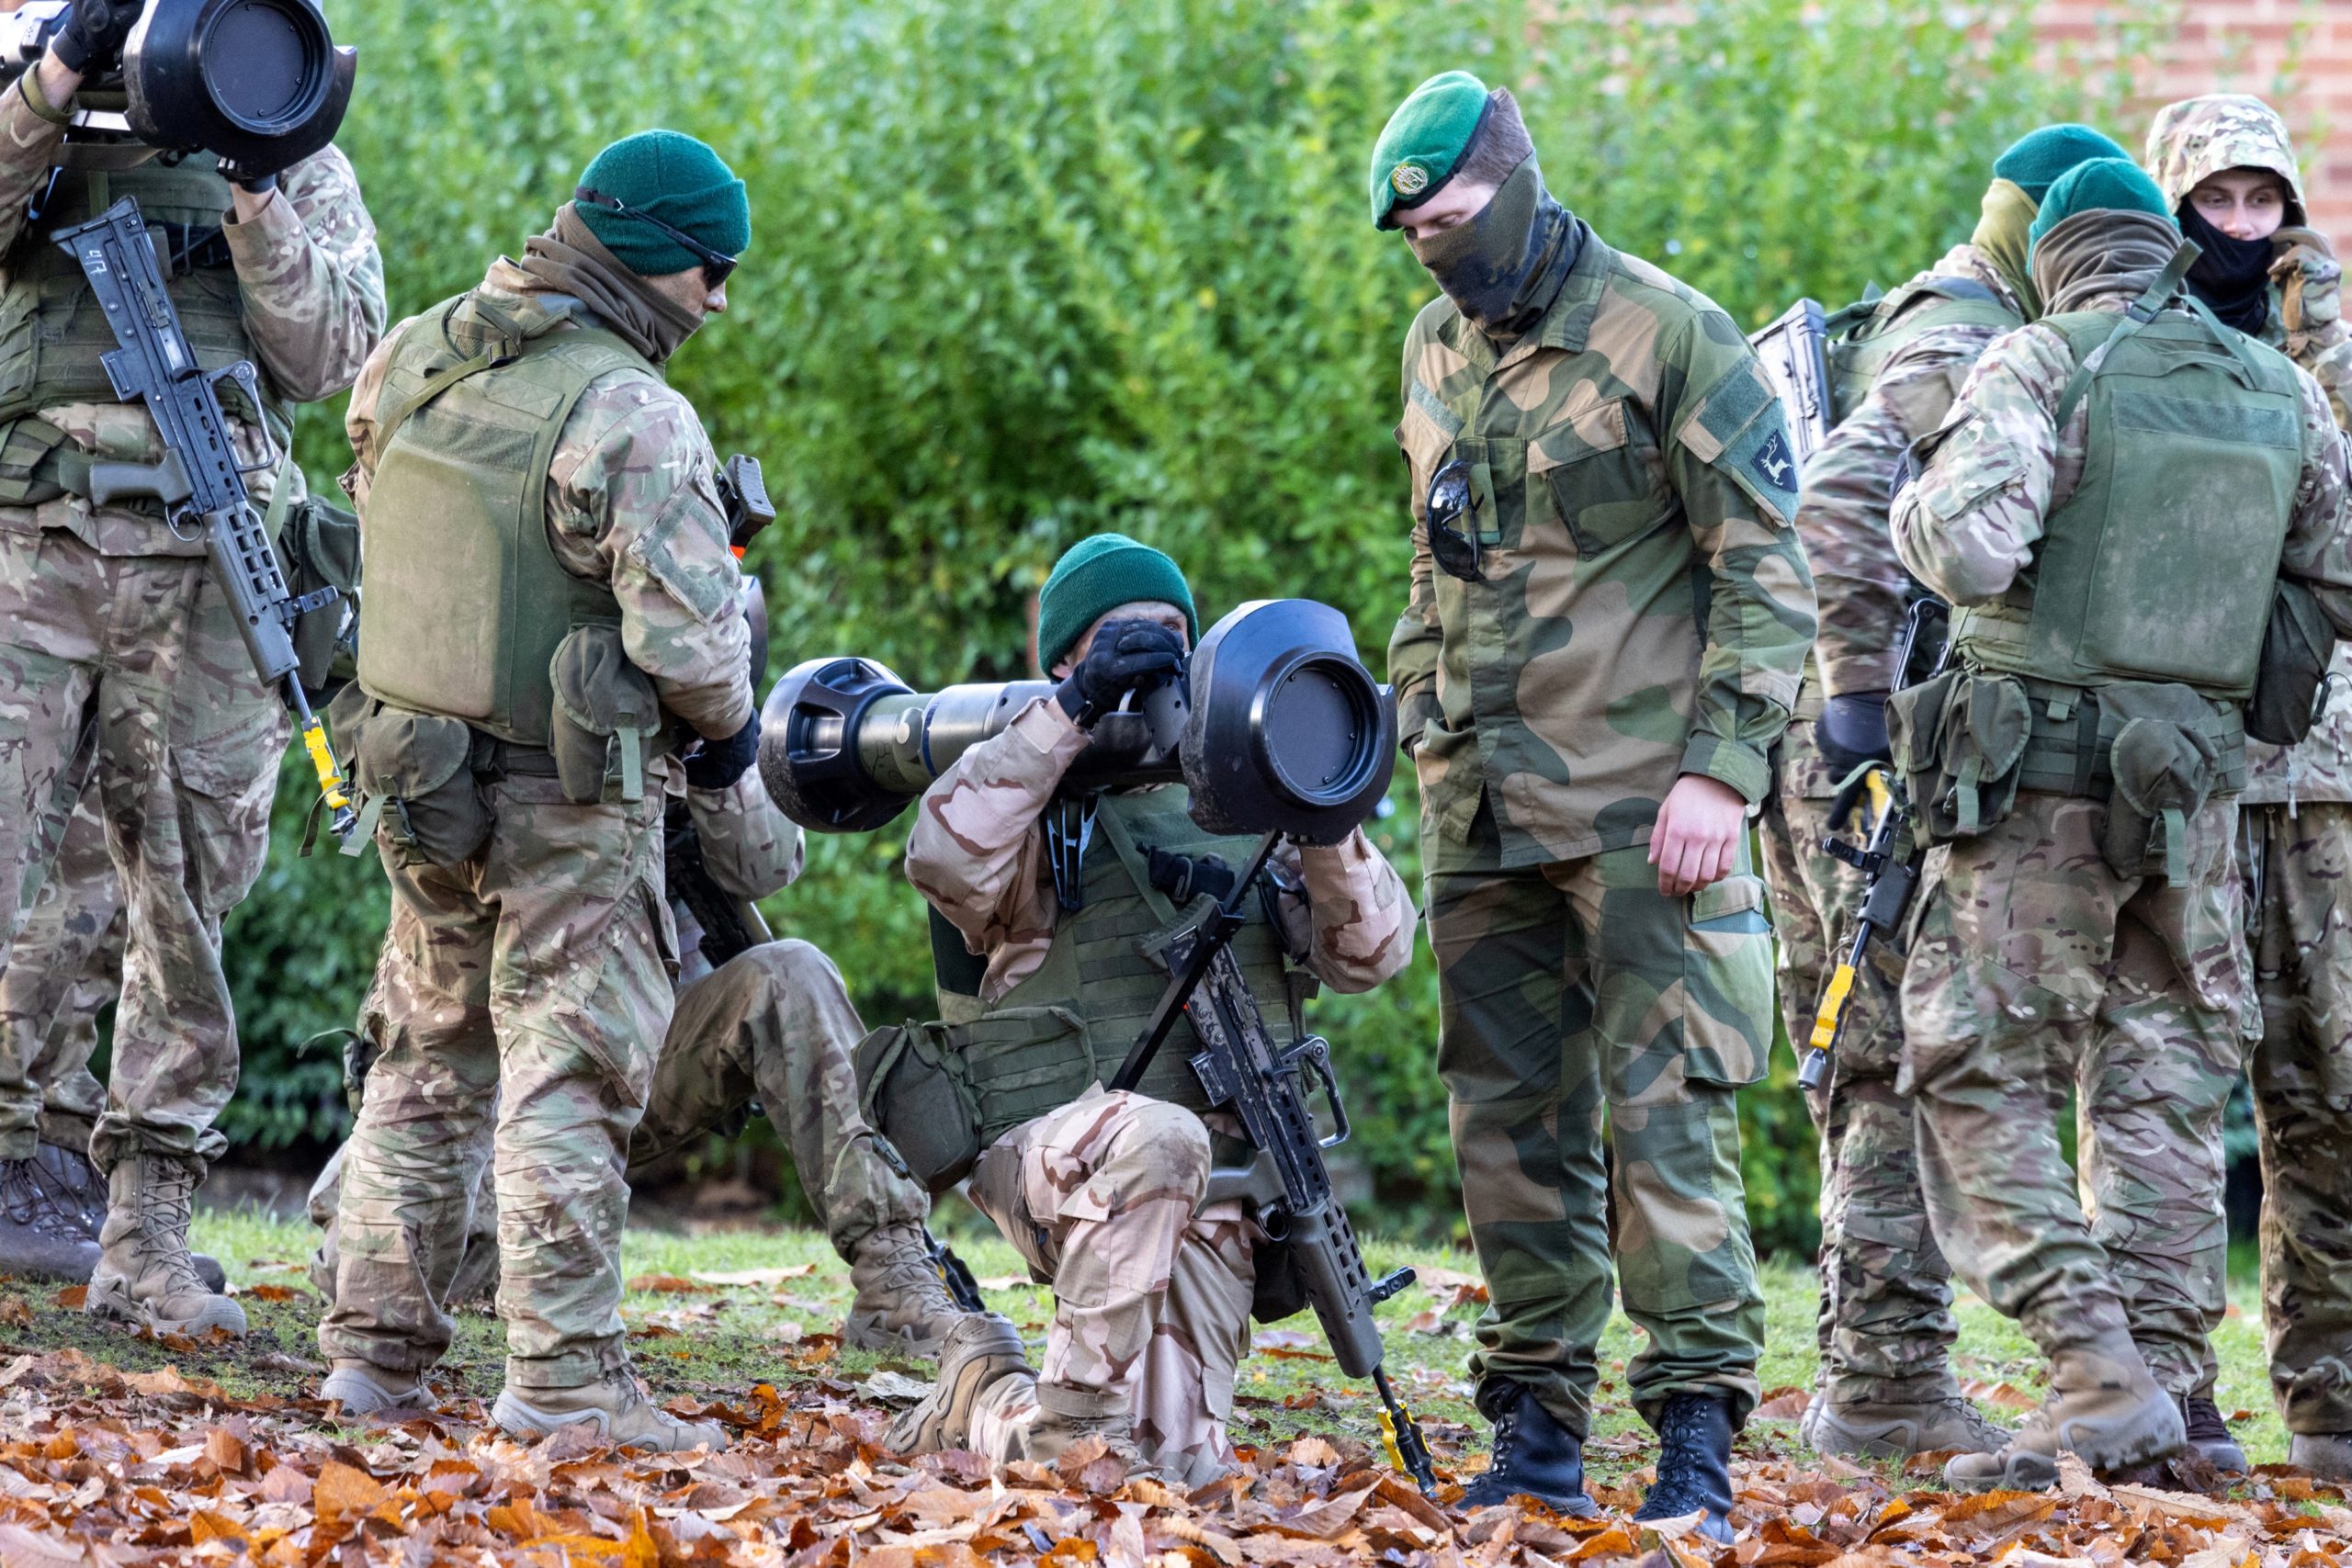 Soldiers from Ukraine take part in a training exercise organised by members of the Joint Expeditionary Force (JEF), in the north east of England on November 9, 2022. - Since February, JEF members - comprising Denmark, Estonia, Finland, Iceland, Latvia, Lithuania, the Netherlands, Norway, Sweden and the United Kingdom - have been at the forefront of providing diplomatic, financial, humanitarian and military support to Ukraine, nationally and in various international frameworks. 